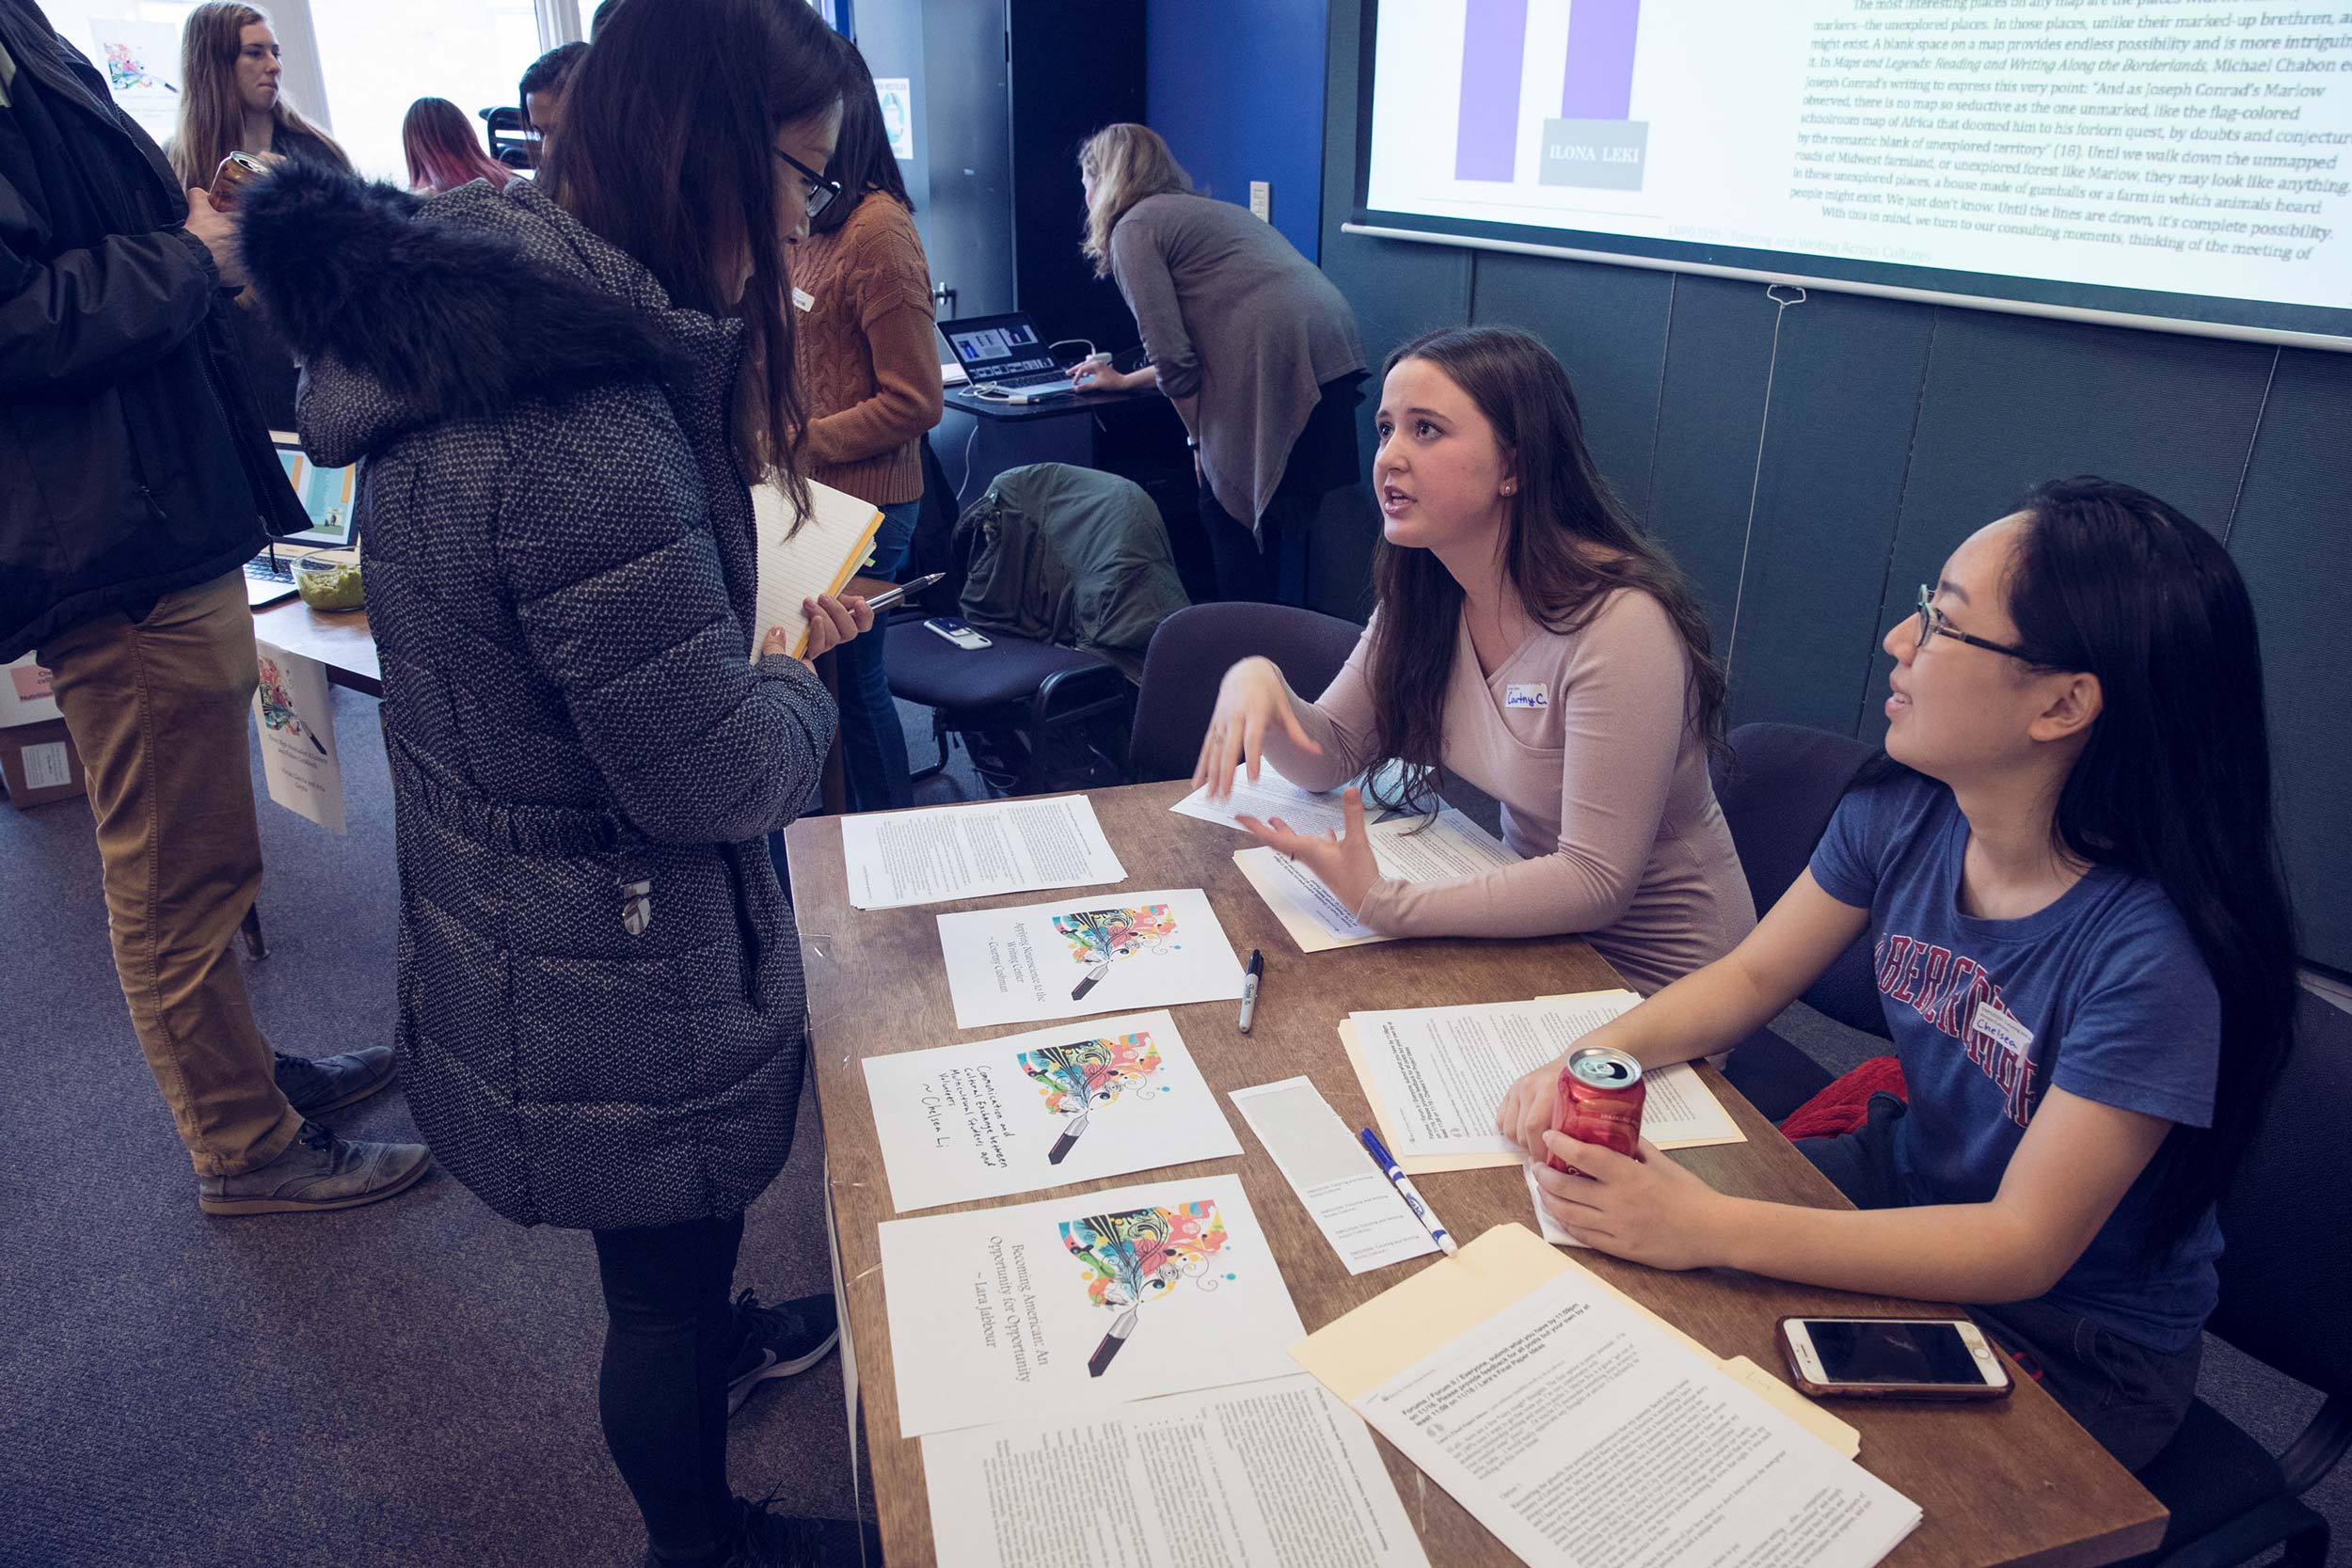 Courtny Cushman, left, and Chelsea Li, right talk to a person at their table